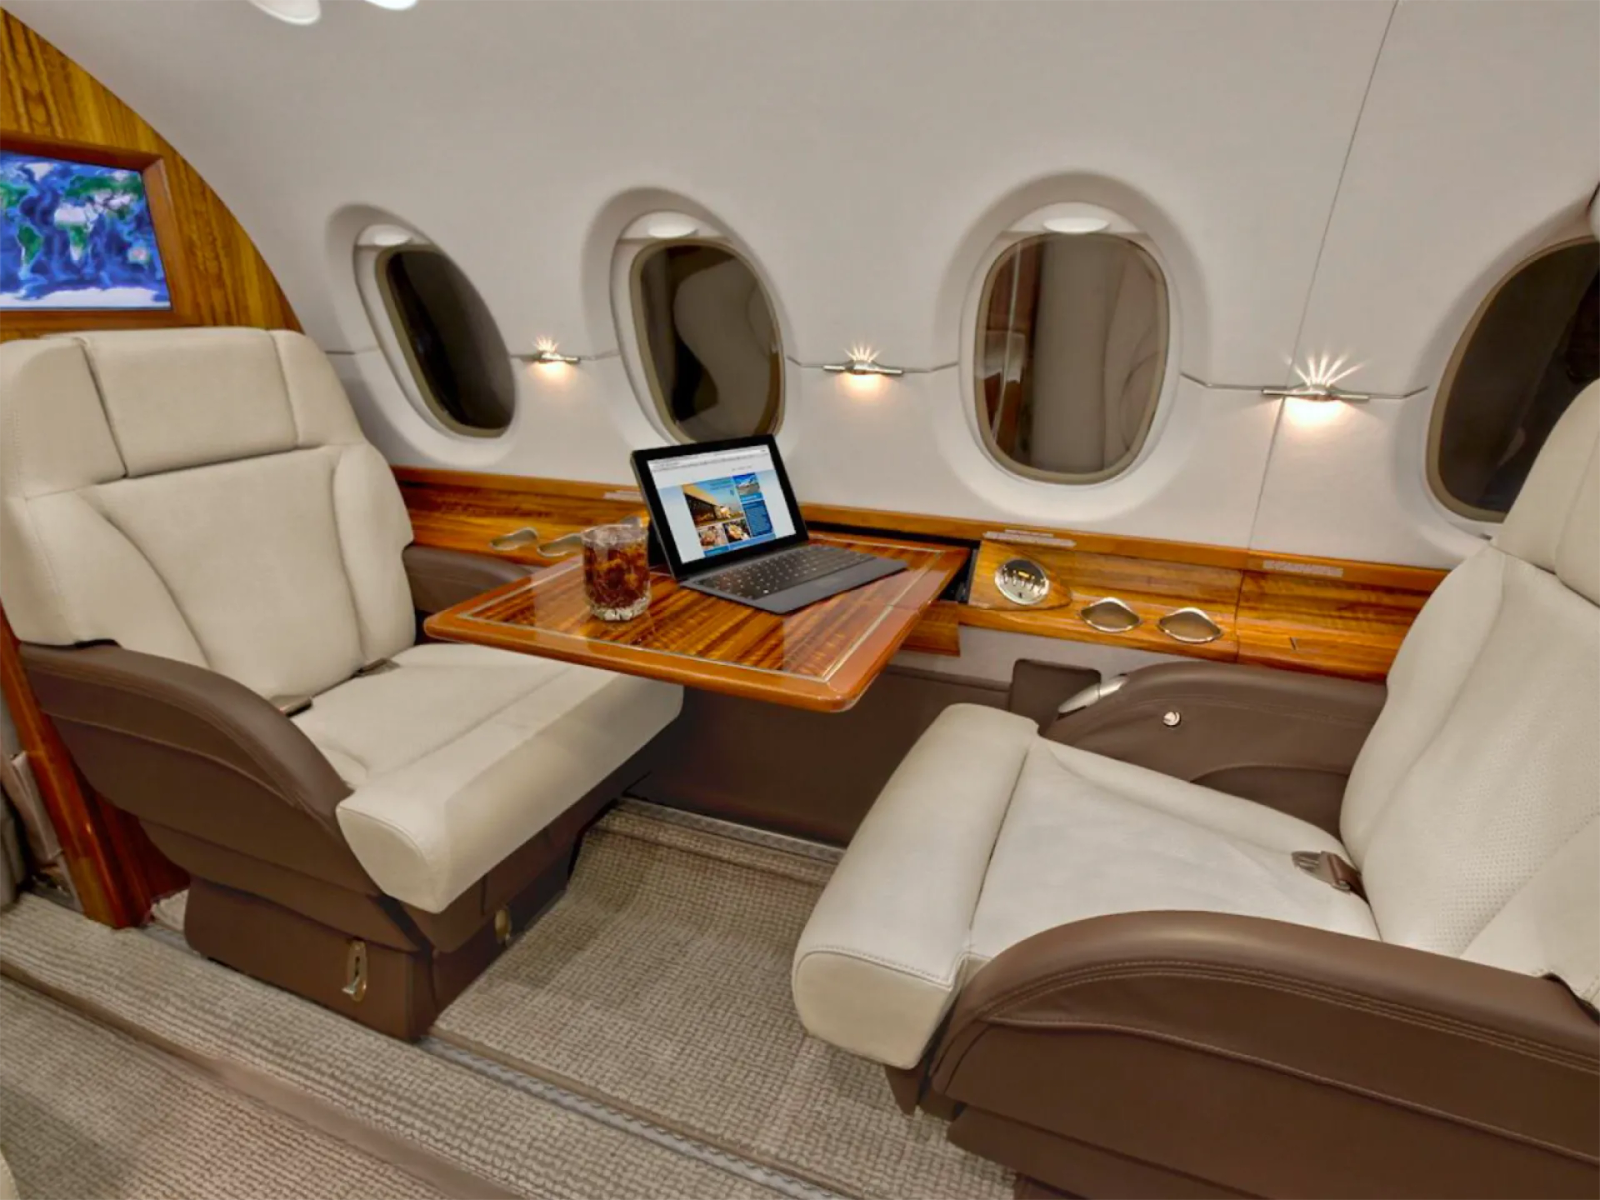 Inside of a private jet cabin.